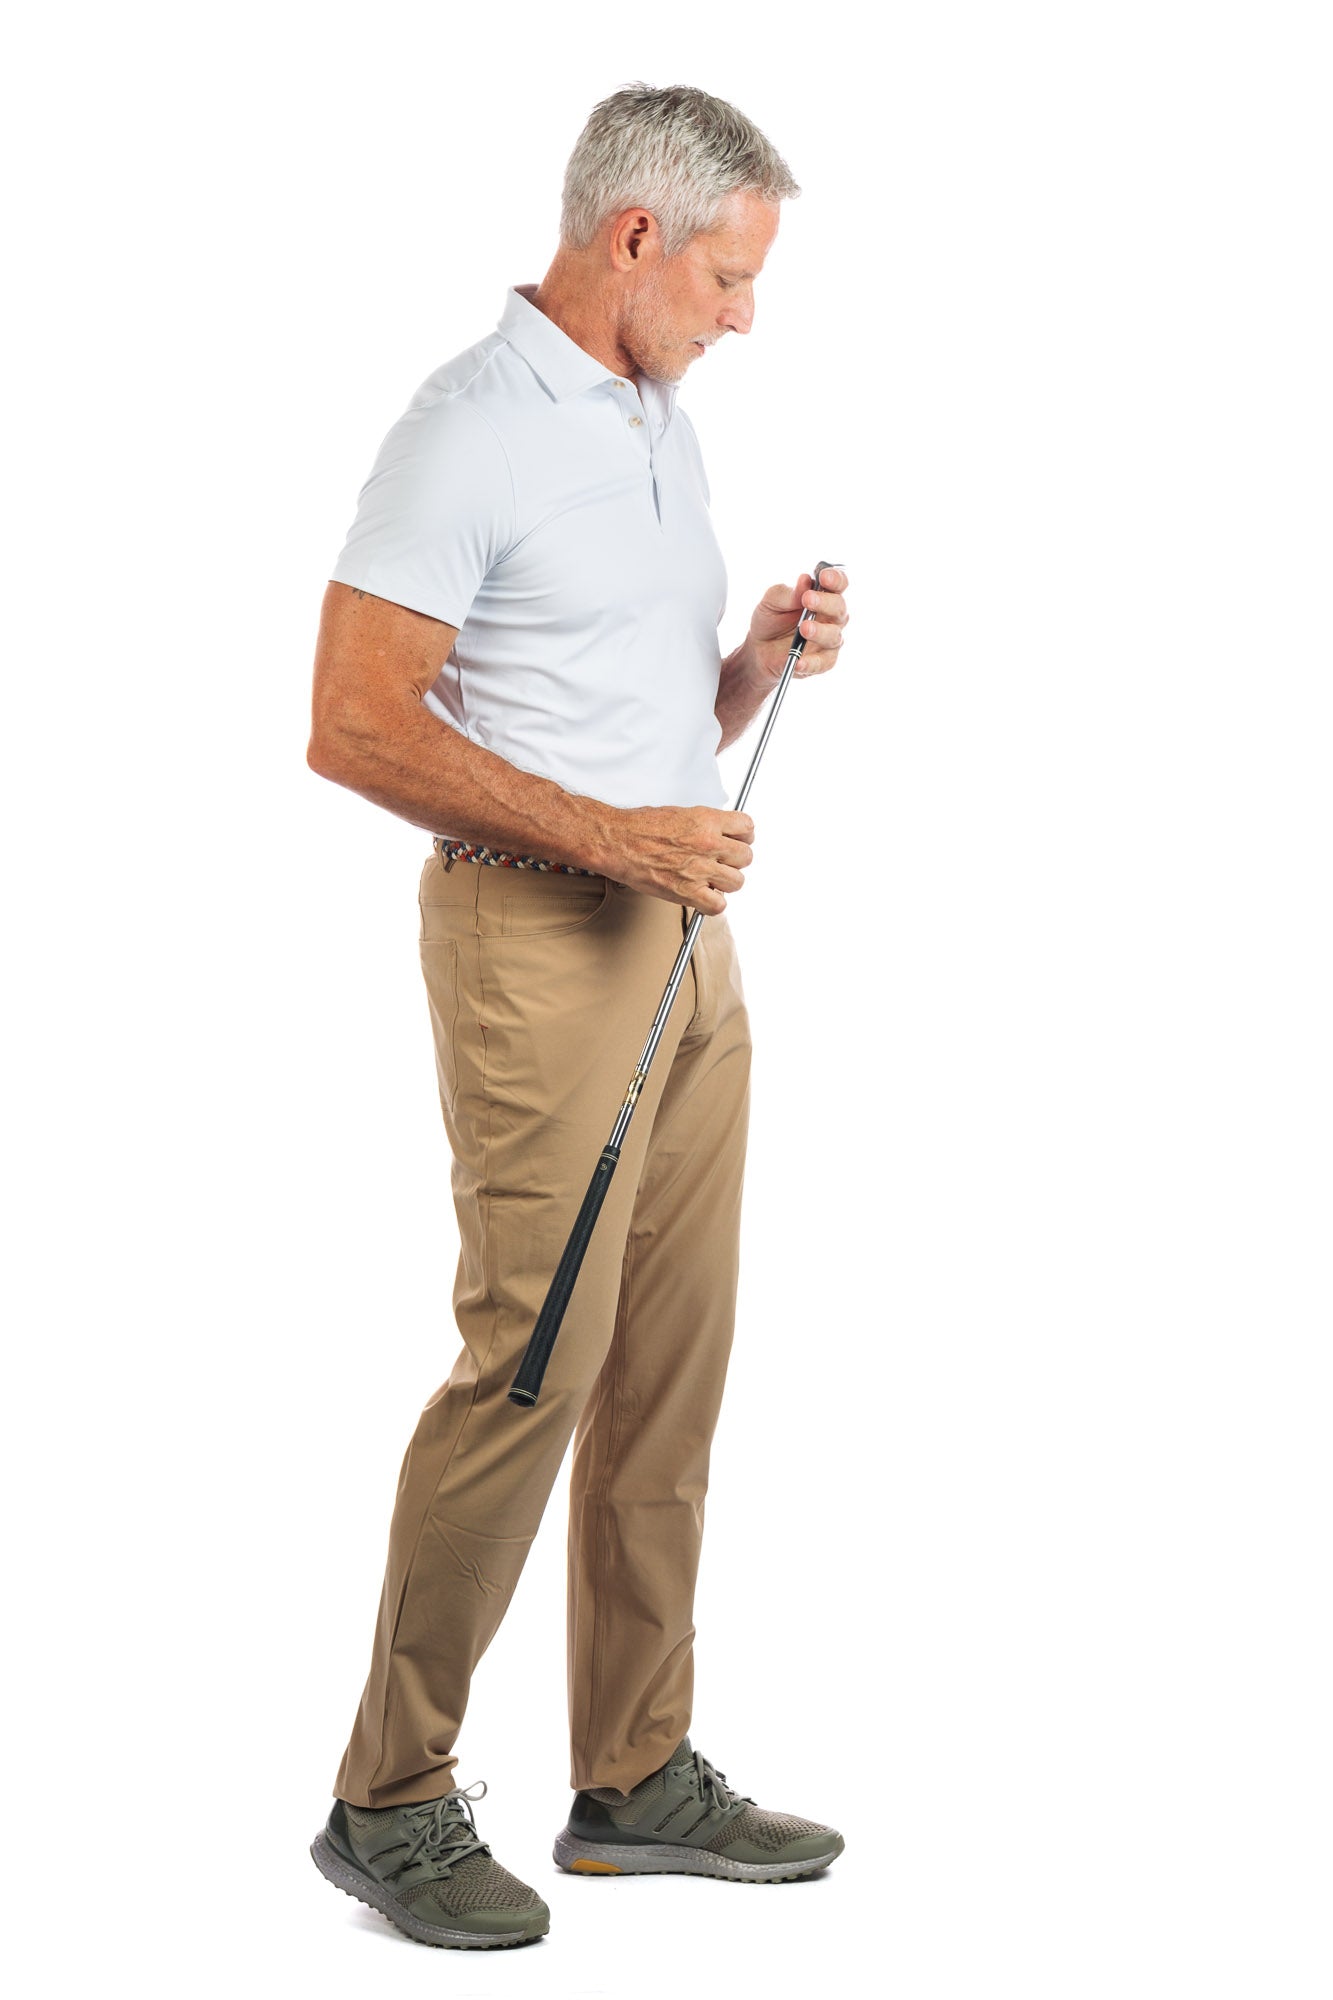 Photo of a model wearing our White Golf Polo on a White Background looking down at a golf club. 